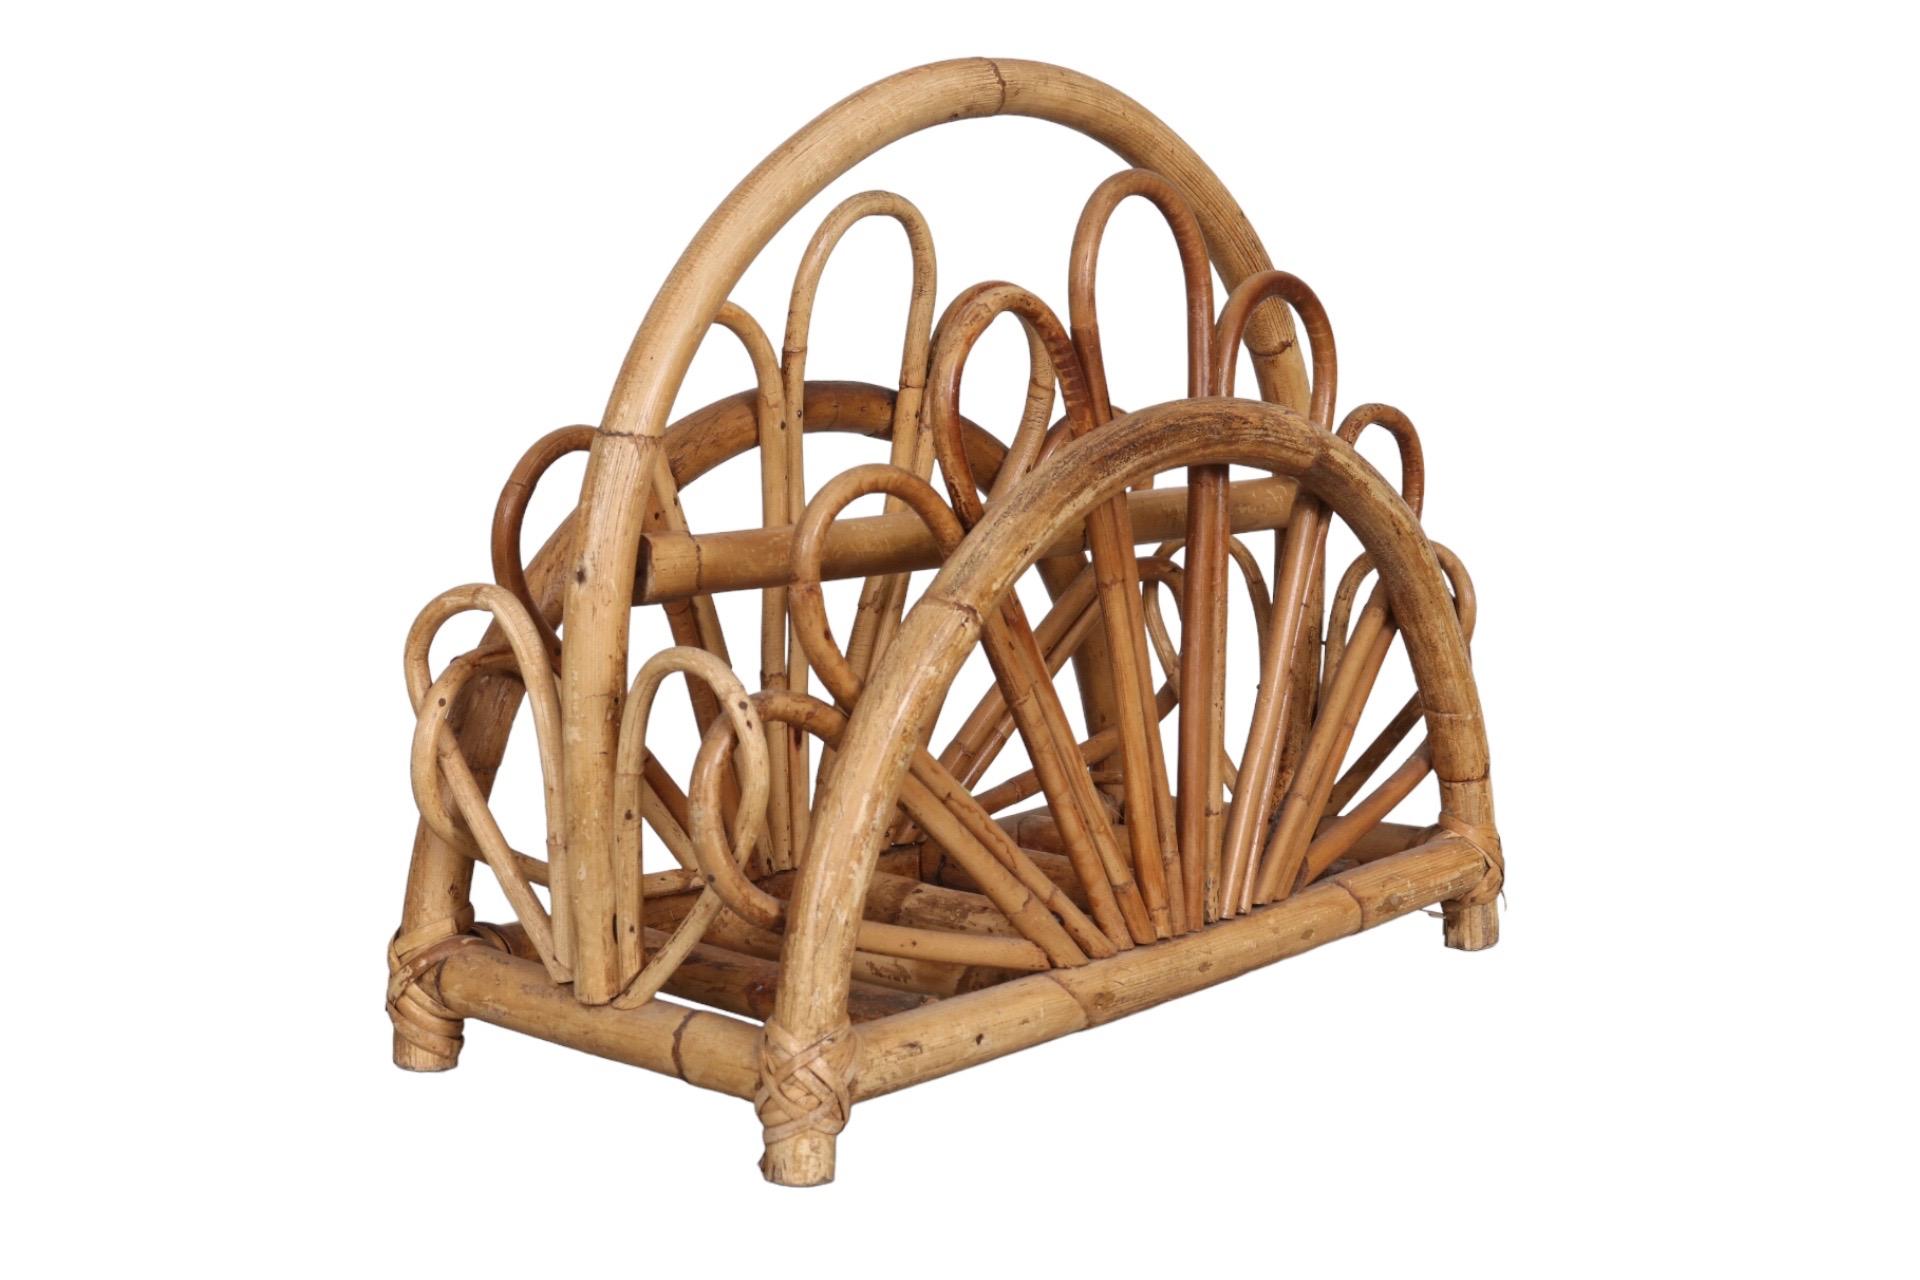 A midcentury magazine rack made of bent bamboo. Arched bamboo forms the frame and is secured at the base with wrapped rattan joints. Pencil wood bamboo is shaped into petals that form half daisys at each side.
